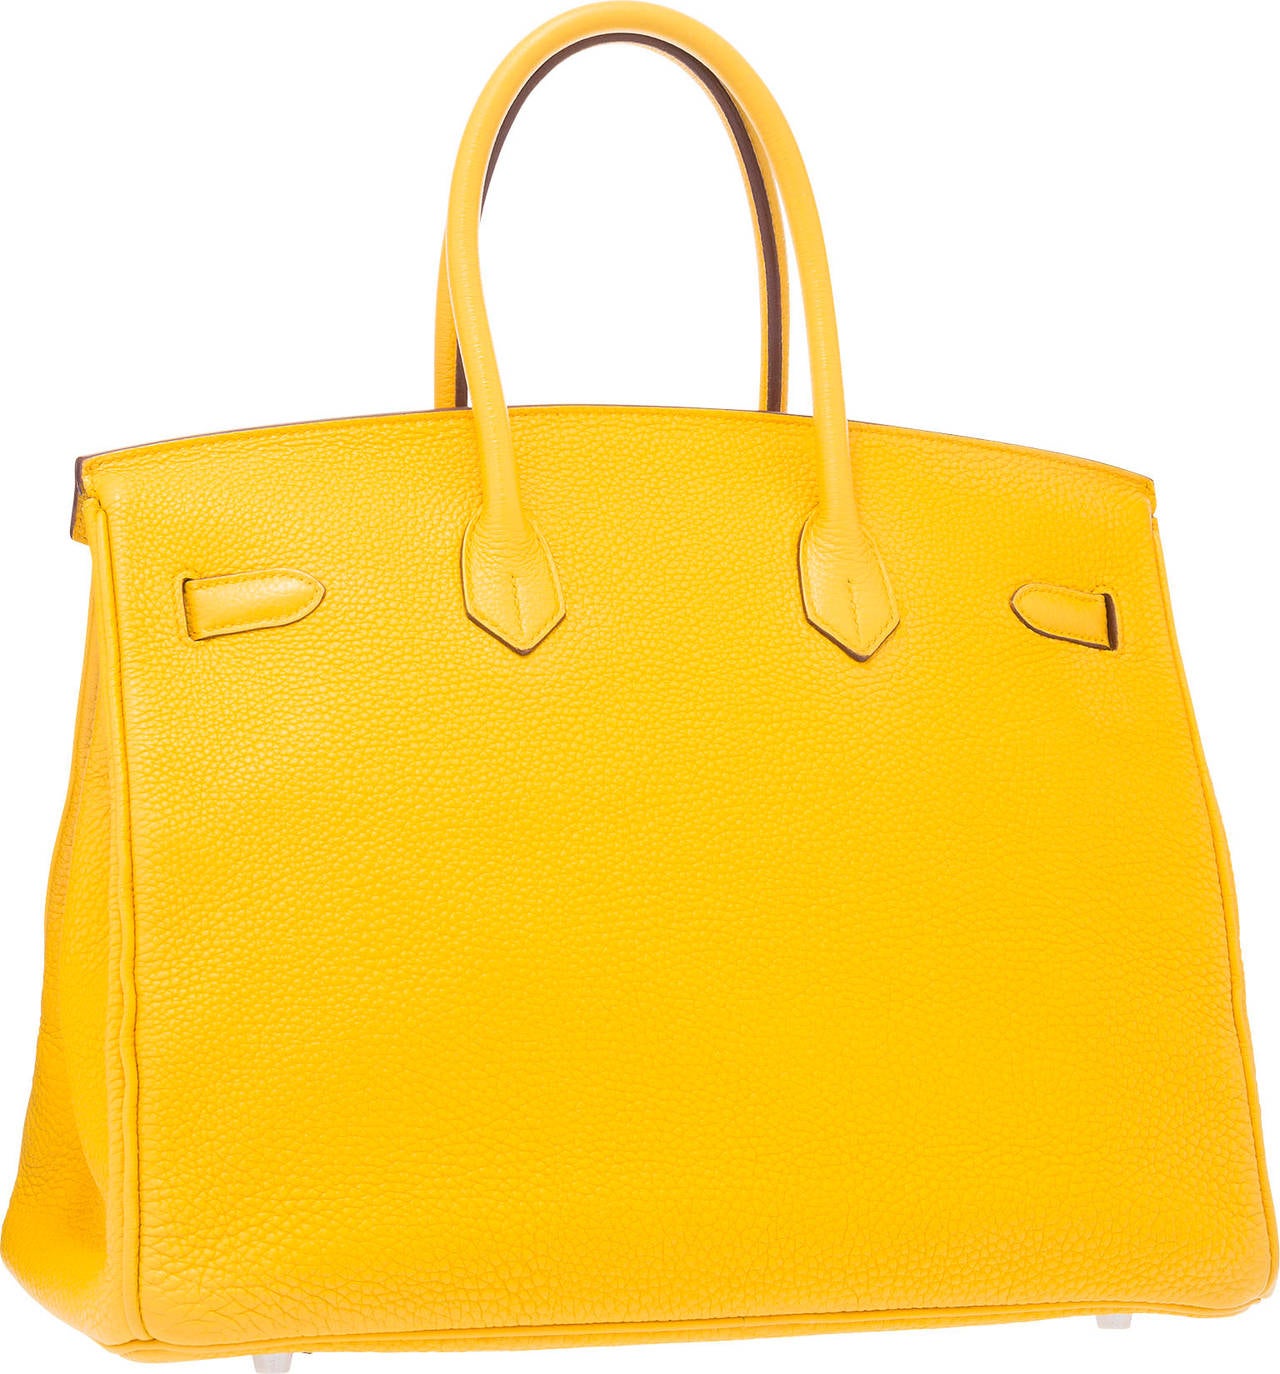 Hermes 35cm Soleil Clemence Leather Birkin Bag with Palladium Hardware In Good Condition For Sale In New York, NY